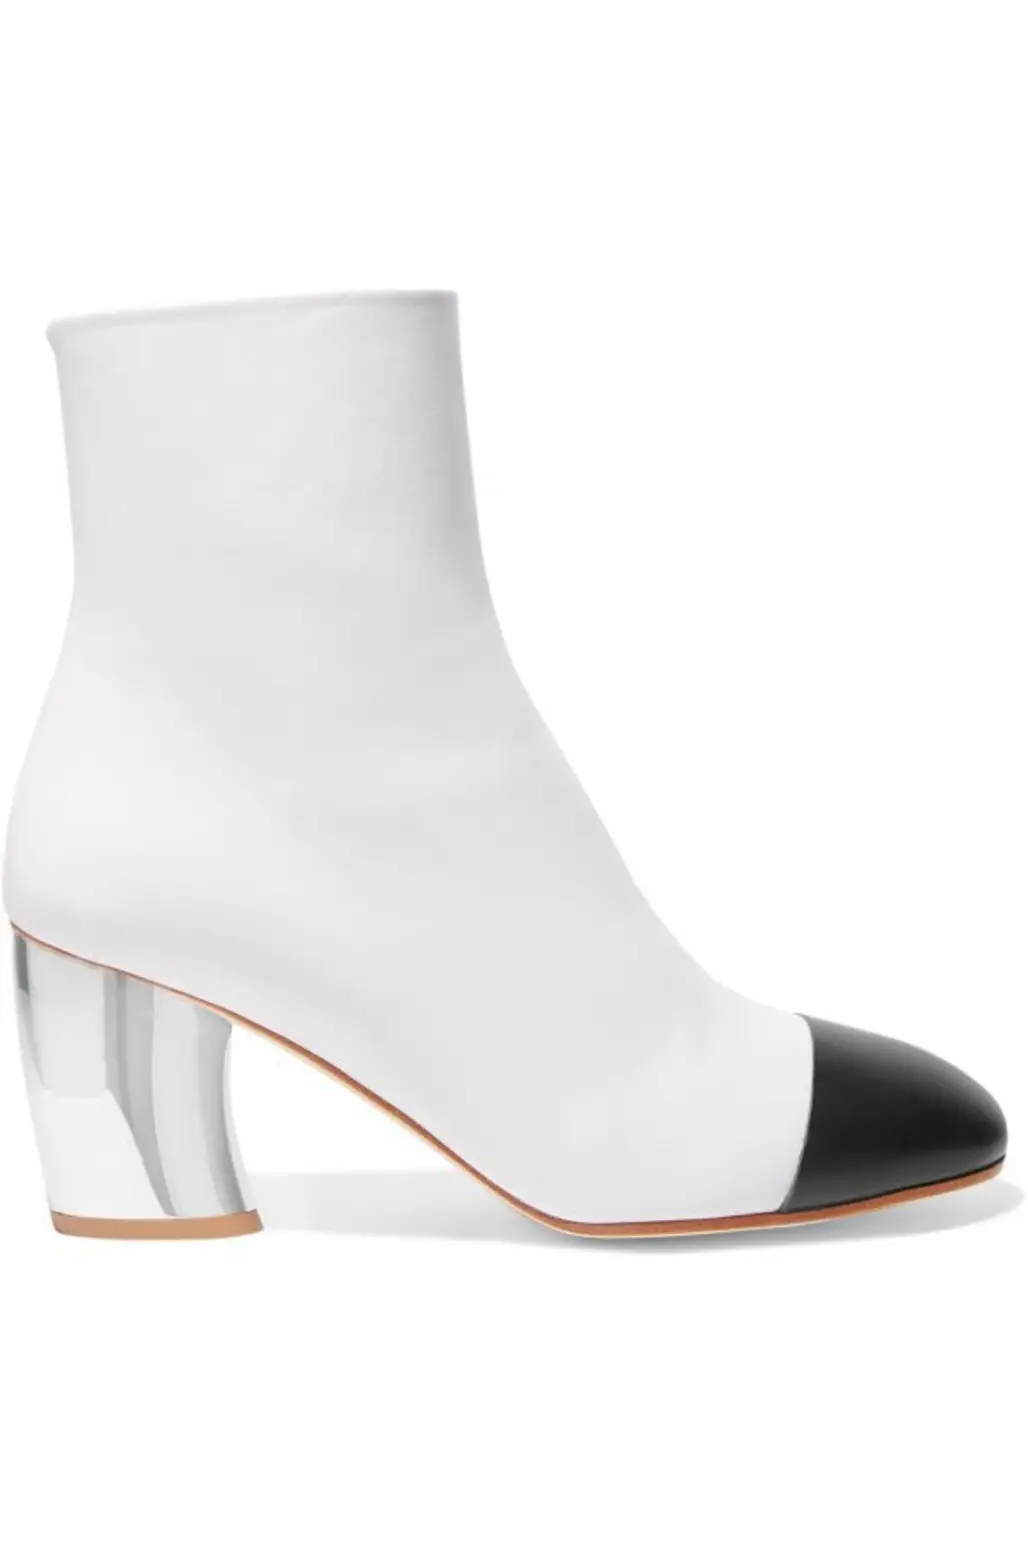 footwear, white, boot, shoe, product design,